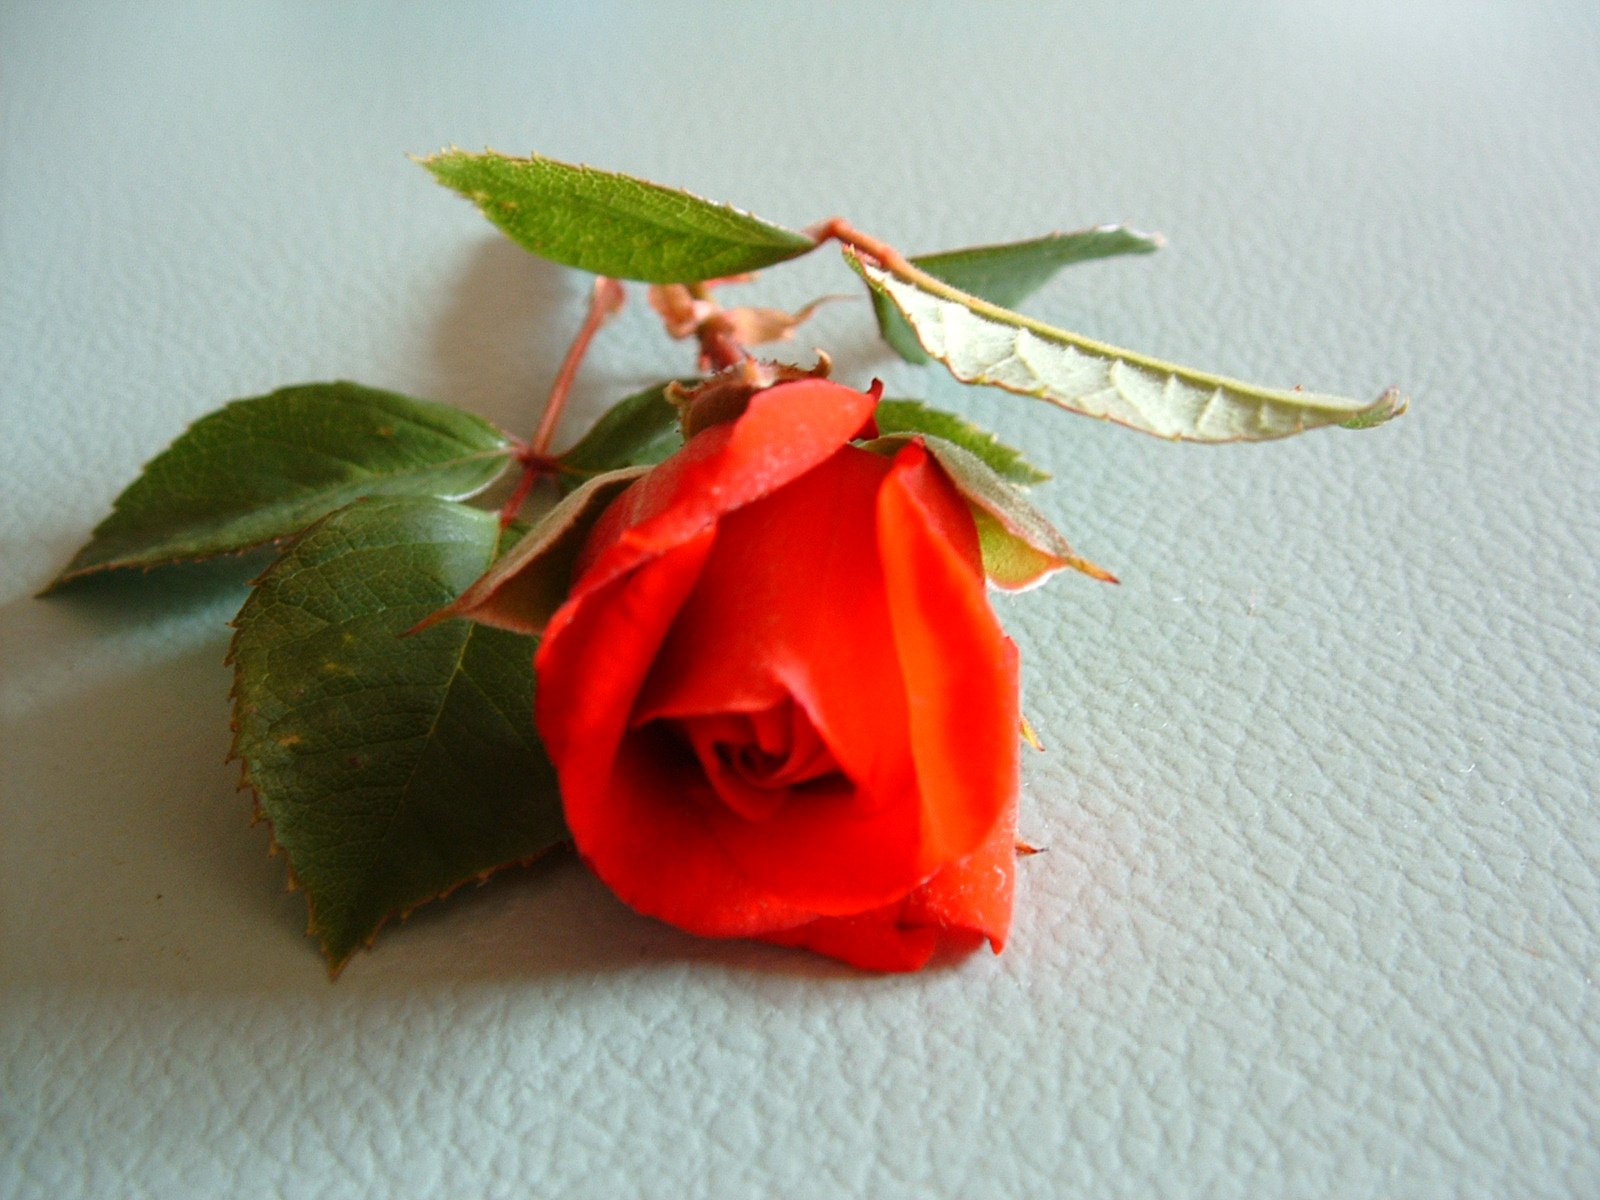 a single rose with its stem still attached